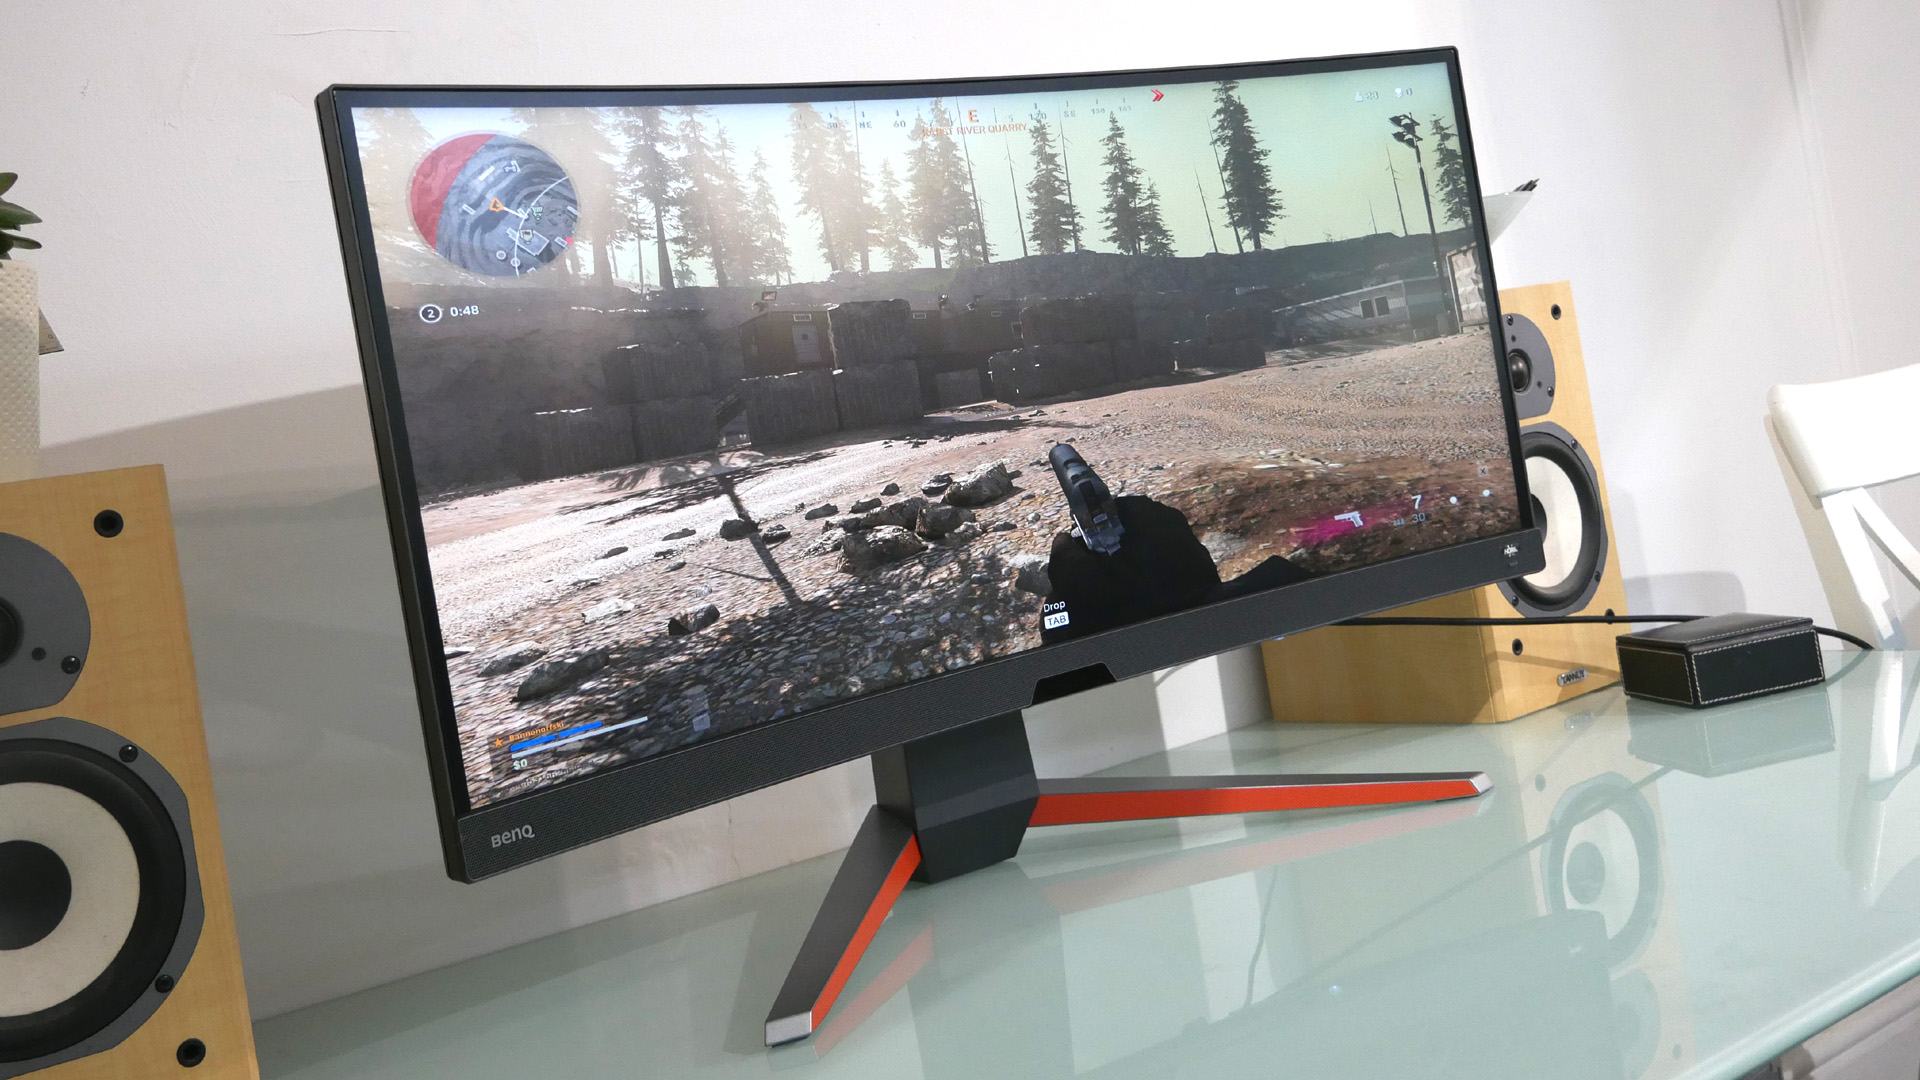 BenQ Mobiuz EX3415R review: A good gaming monitor that's very slightly off  target